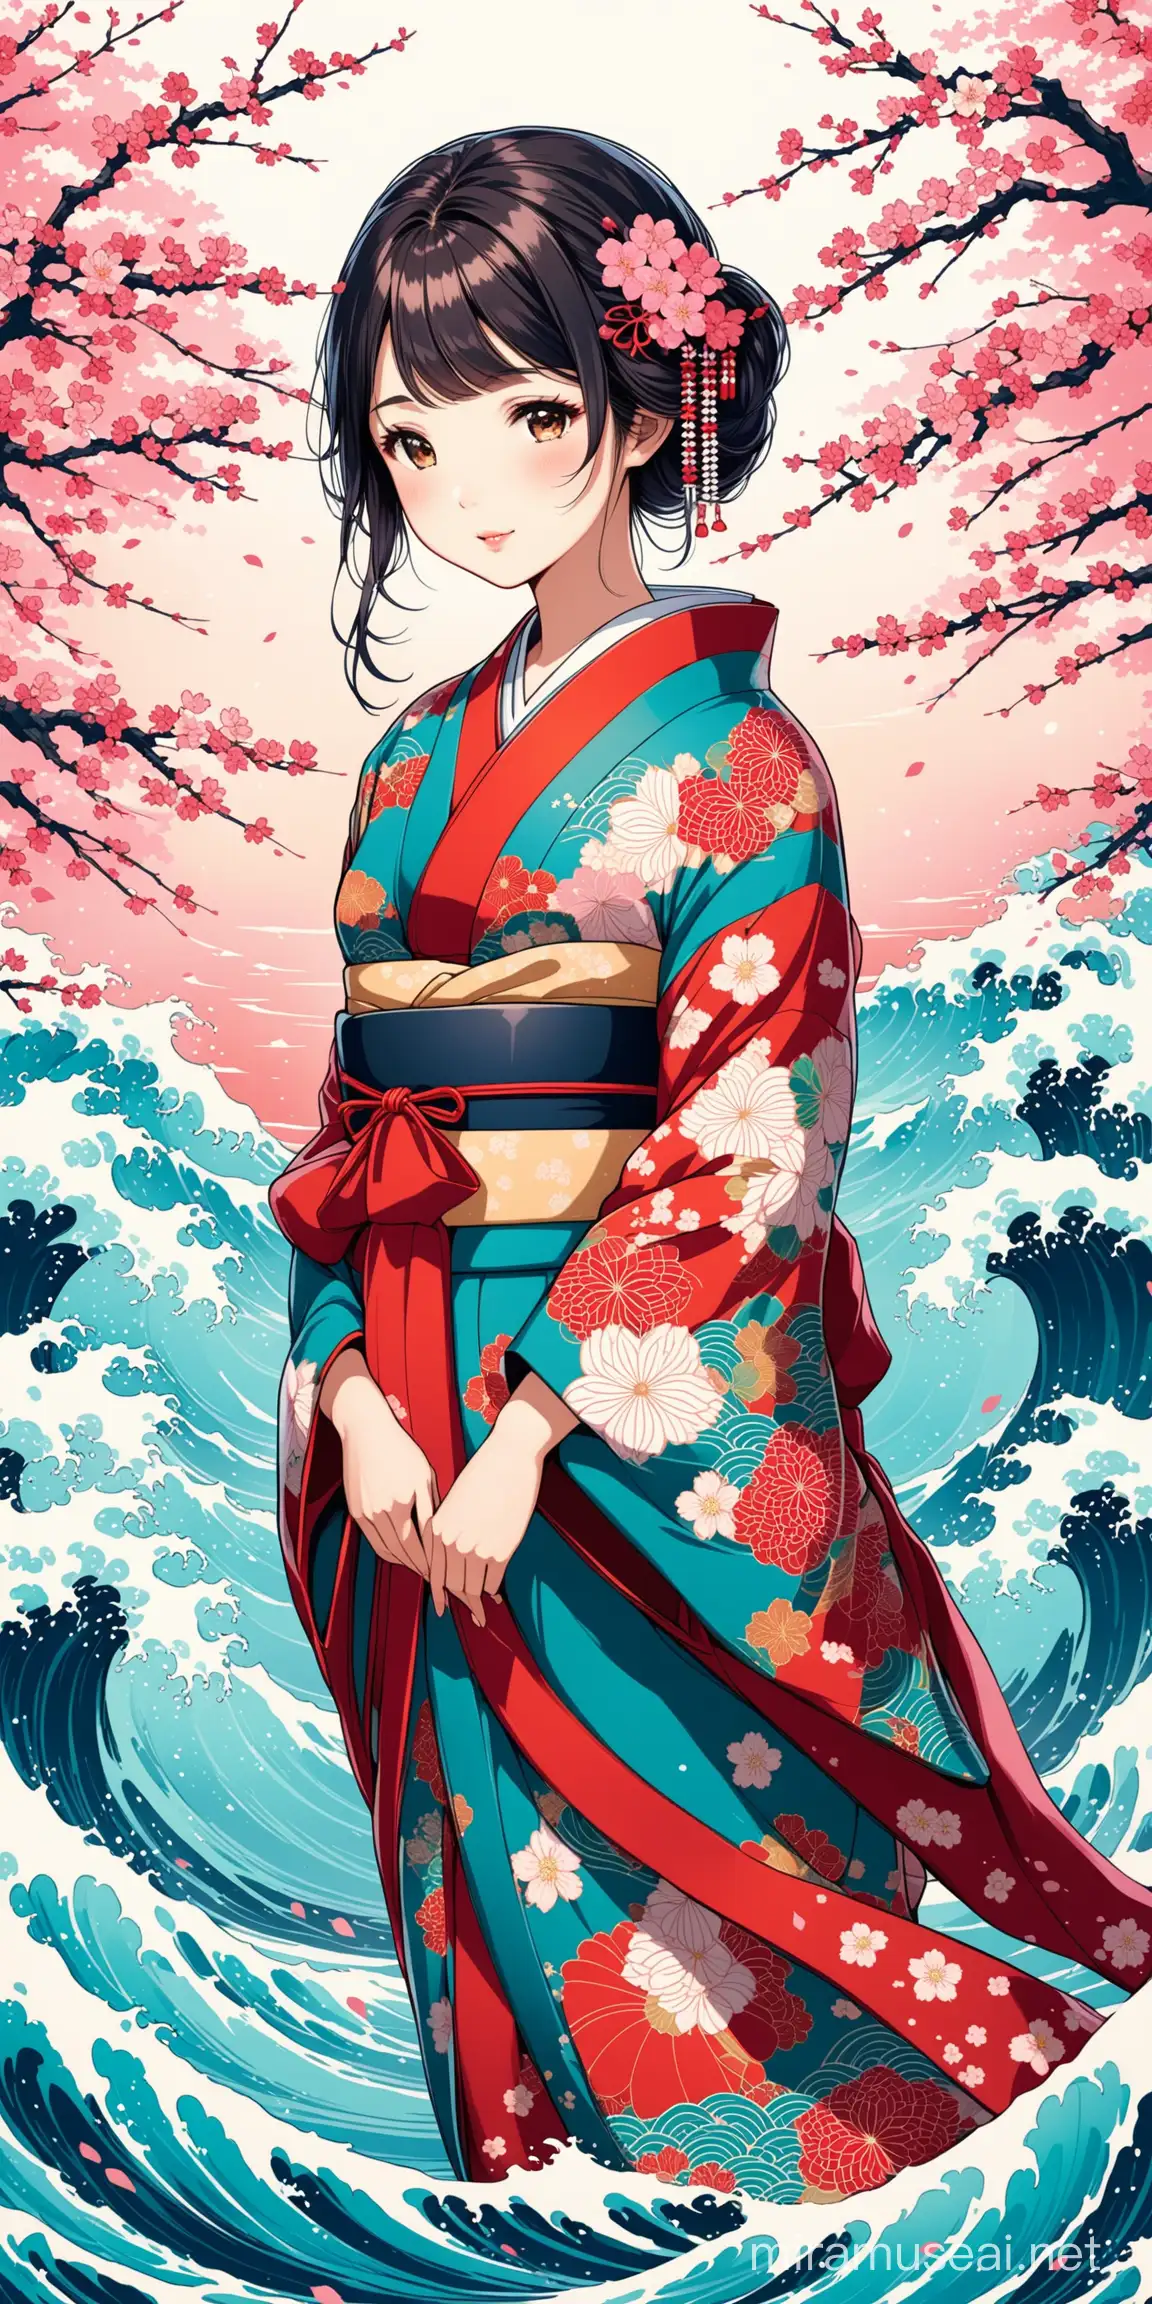 Vibrant Asian Girl in Traditional Kimono with Cherry Blossom Patterns